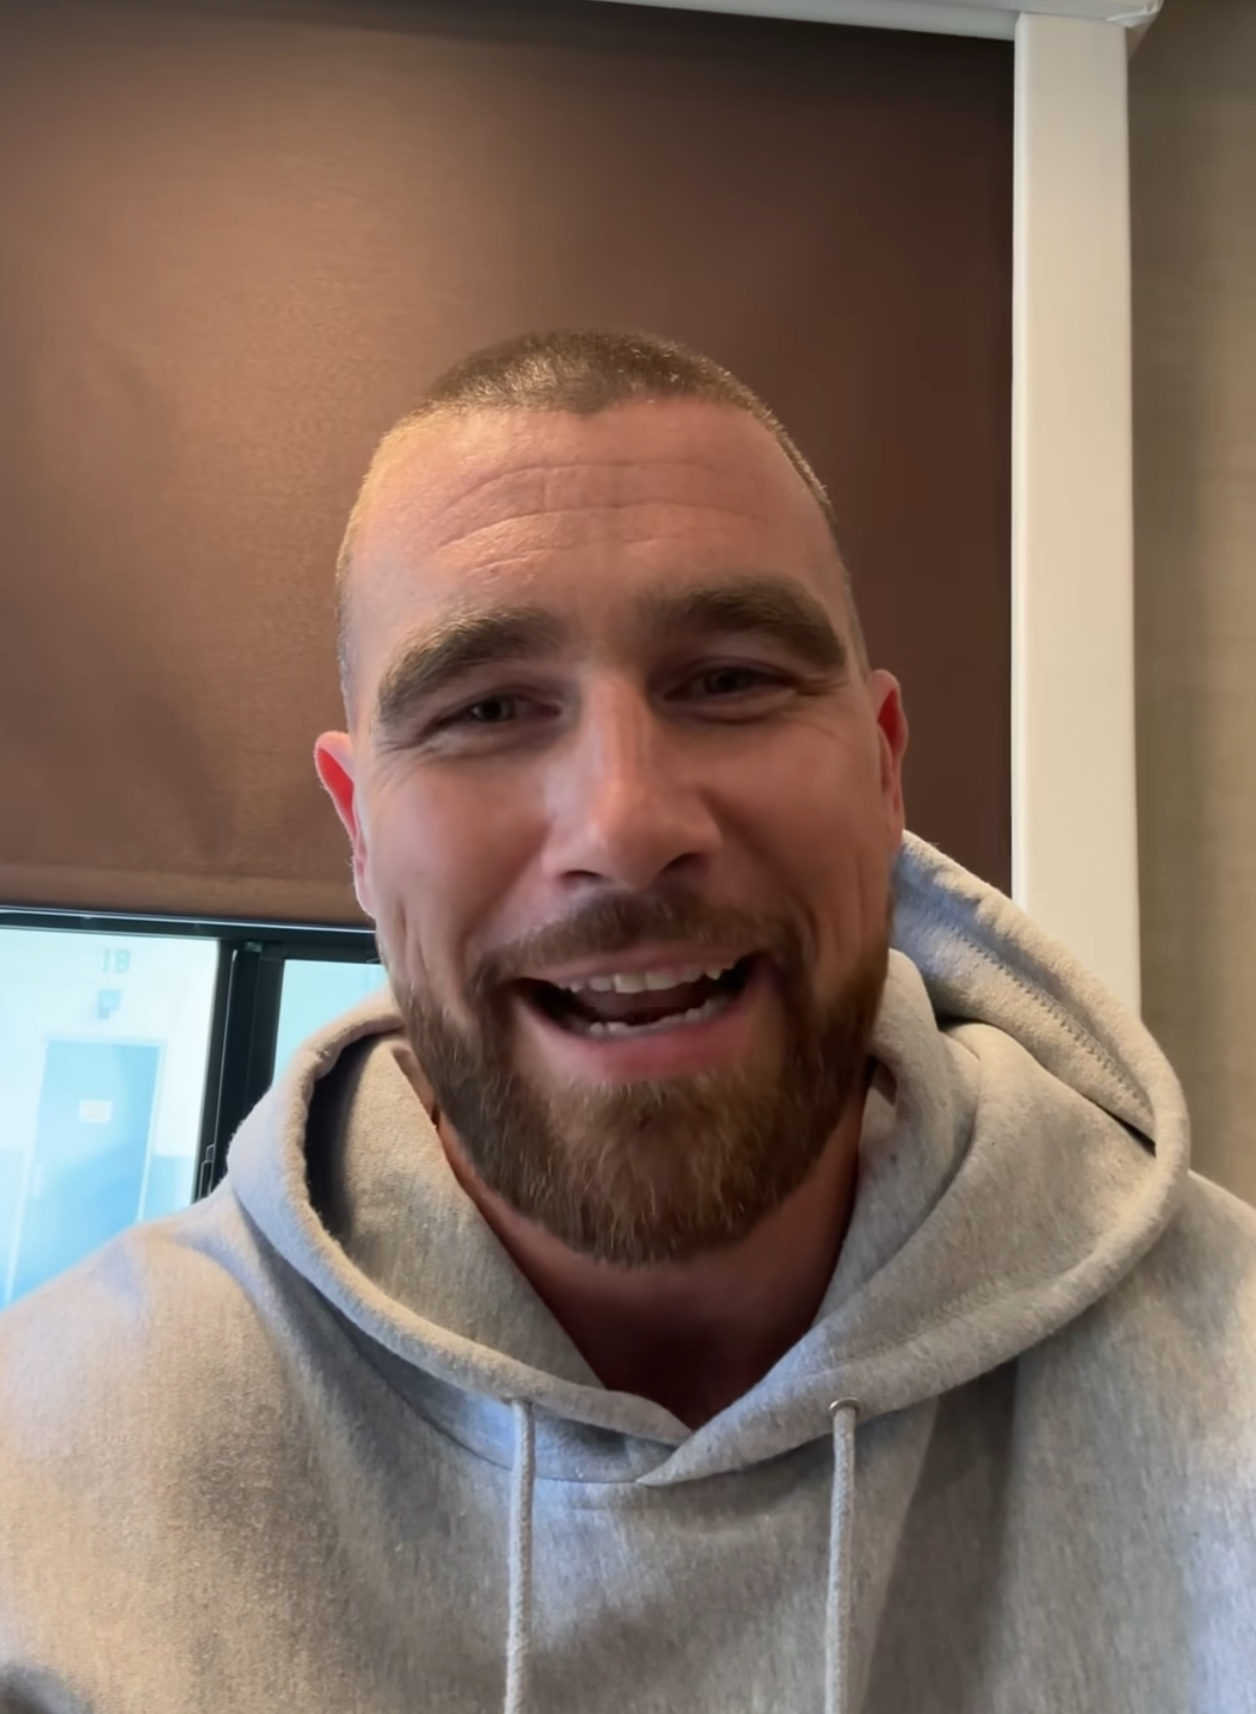 Kansas City Chiefs star Travis Kelce has firmly denied the recent rumors that he invented the already well-known “fade” haircut.